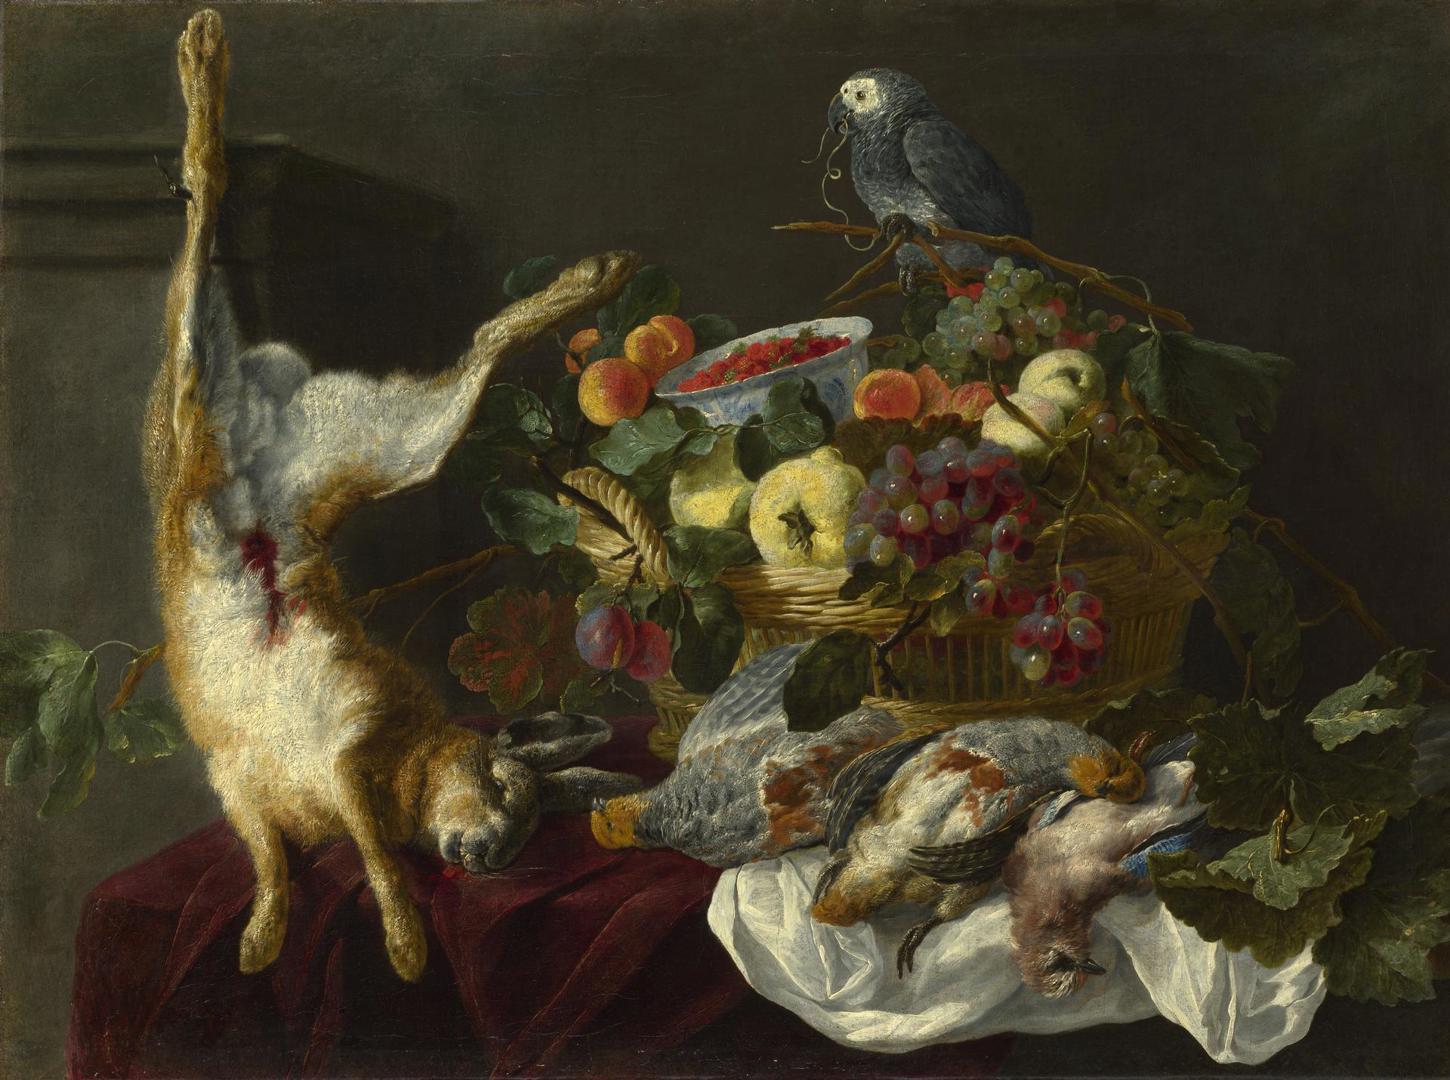 A Still Life with Fruit, Dead Game and a Parrot by Probably by Jan Fyt